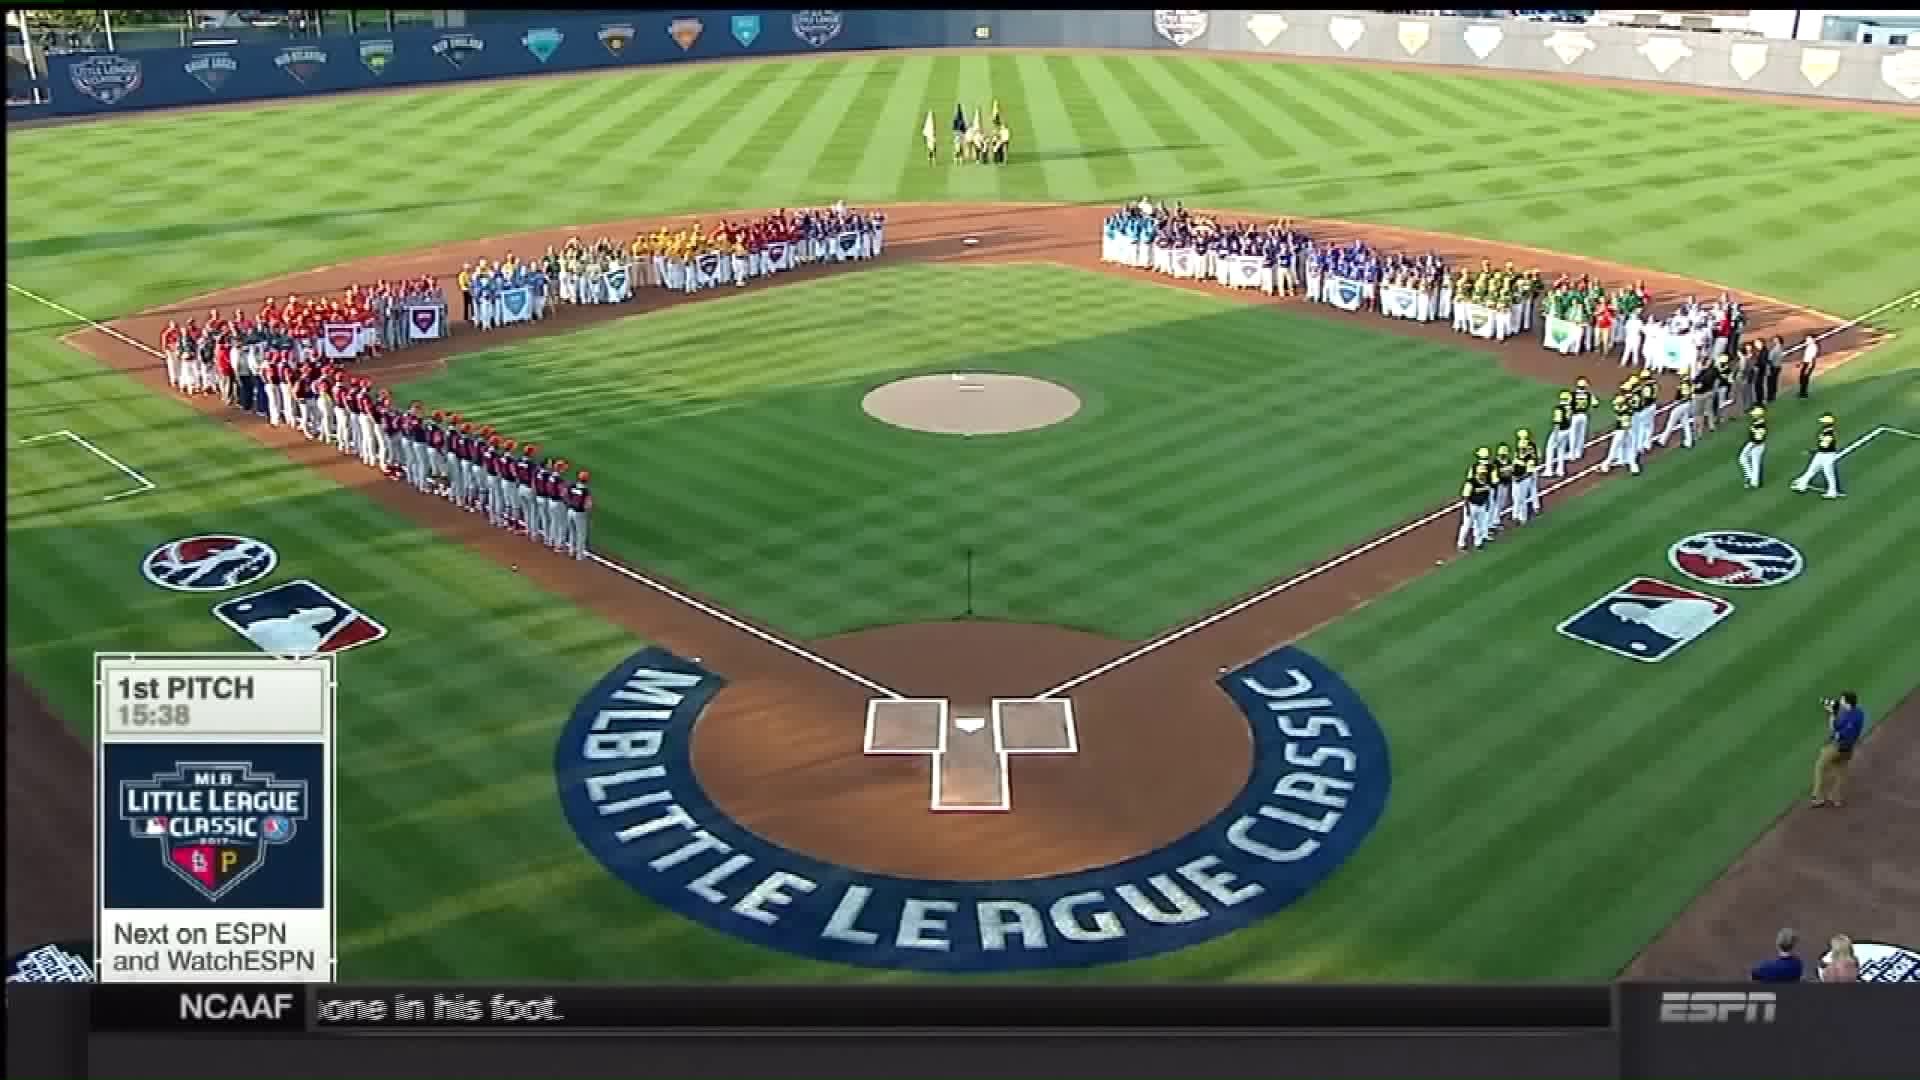 Mets, Phils to Play in Williamsport for Little League World Series